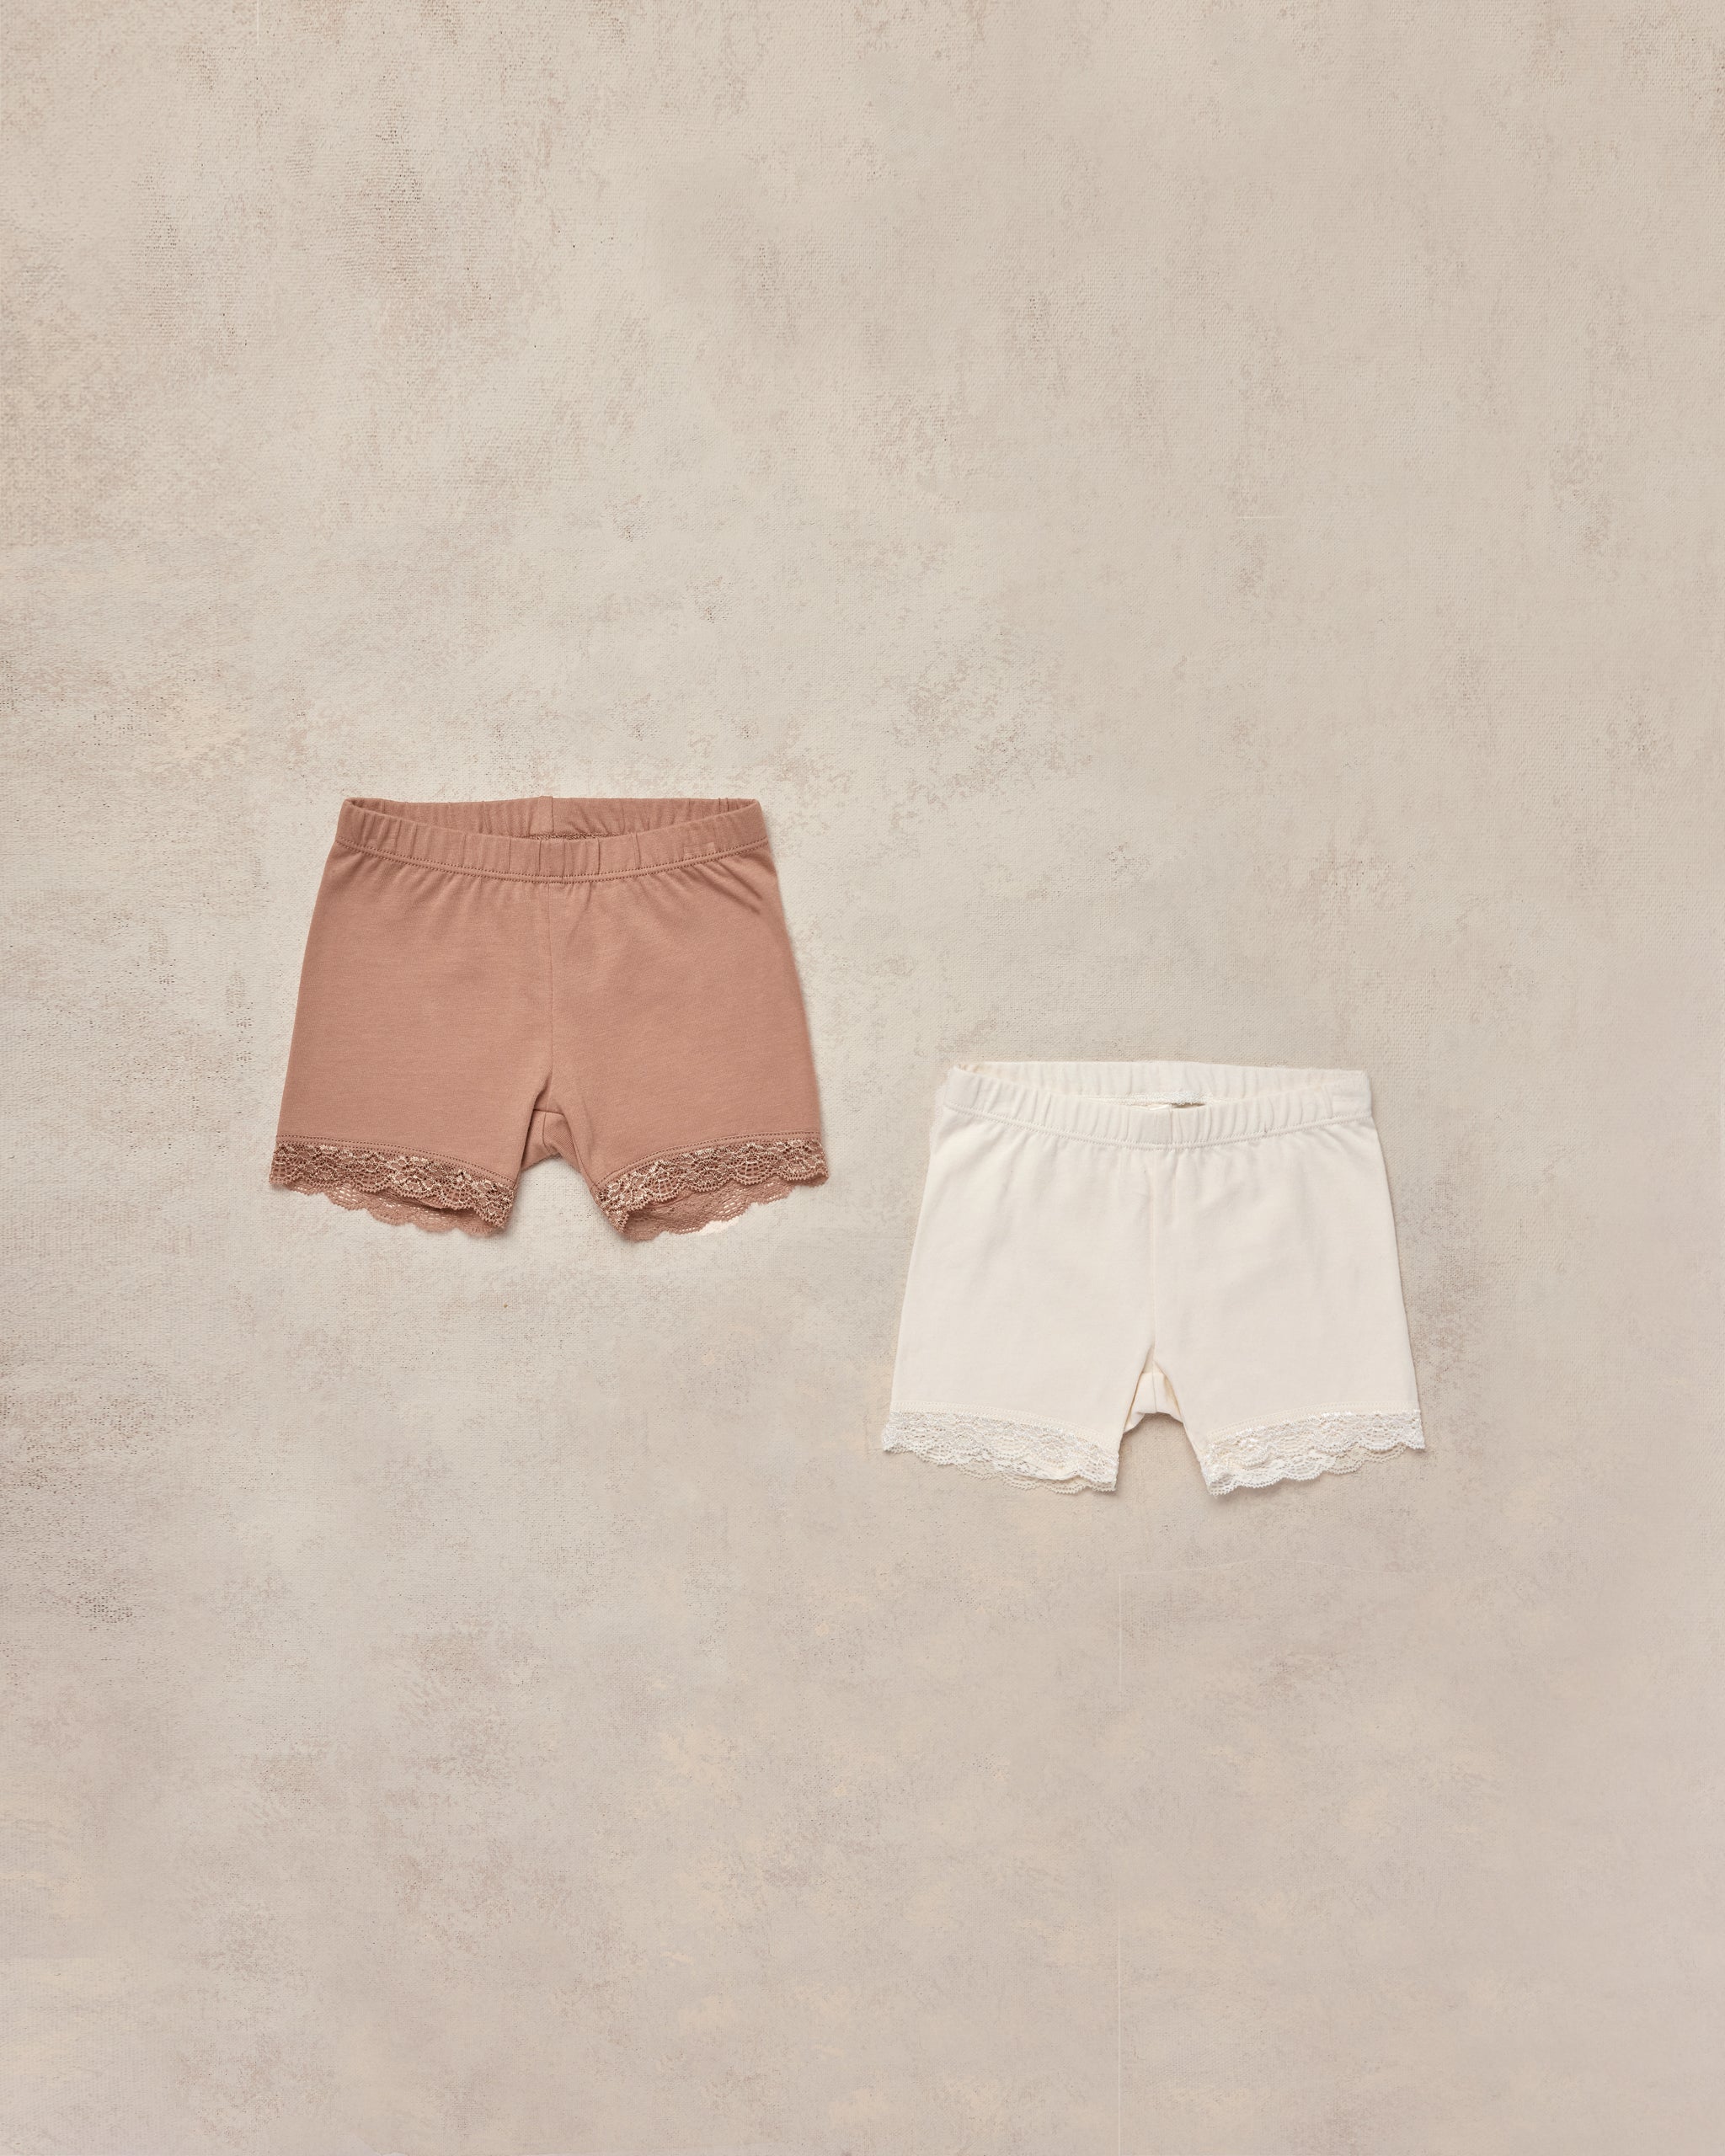 Cartwheel Shorts || Ivory, Mocha - Rylee + Cru | Kids Clothes | Trendy Baby Clothes | Modern Infant Outfits |